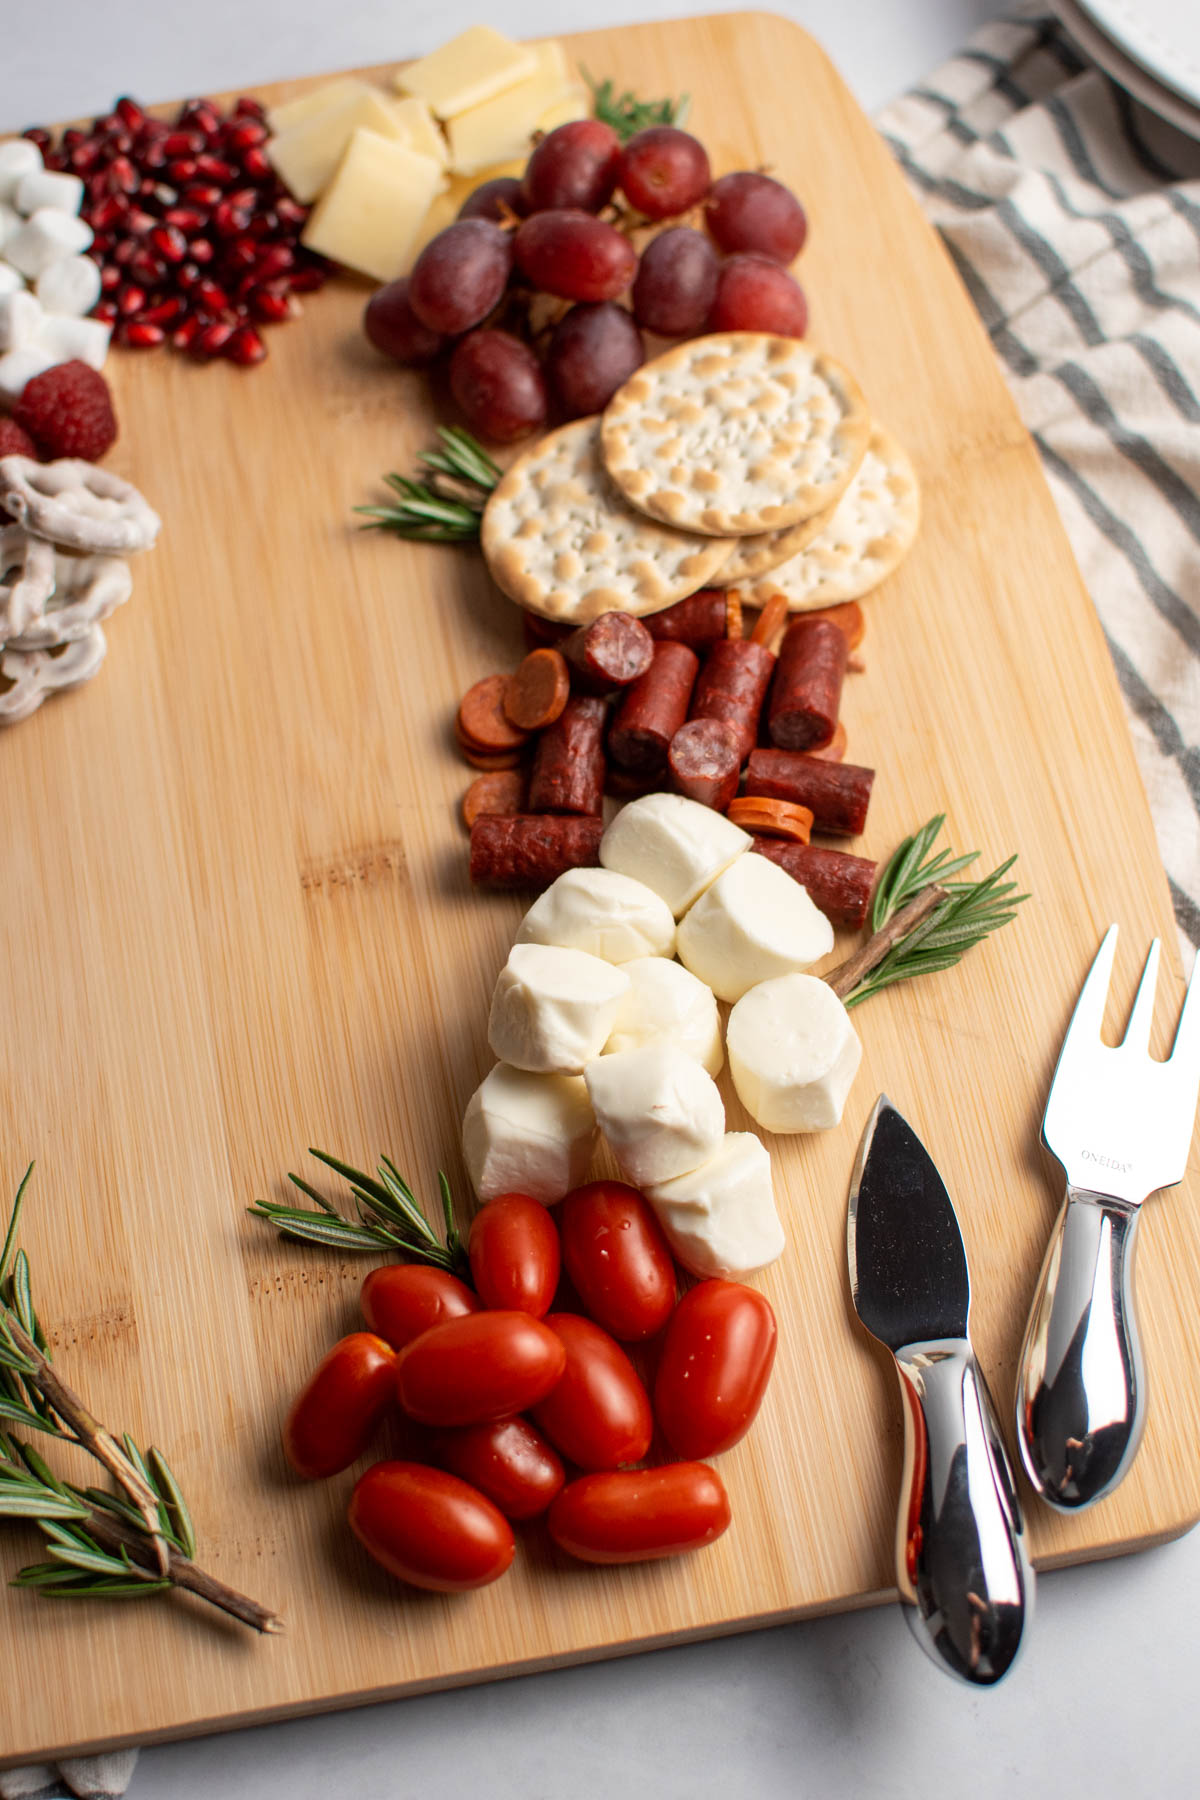 Christmas charcuterie board with red and white foods and fresh rosemary.